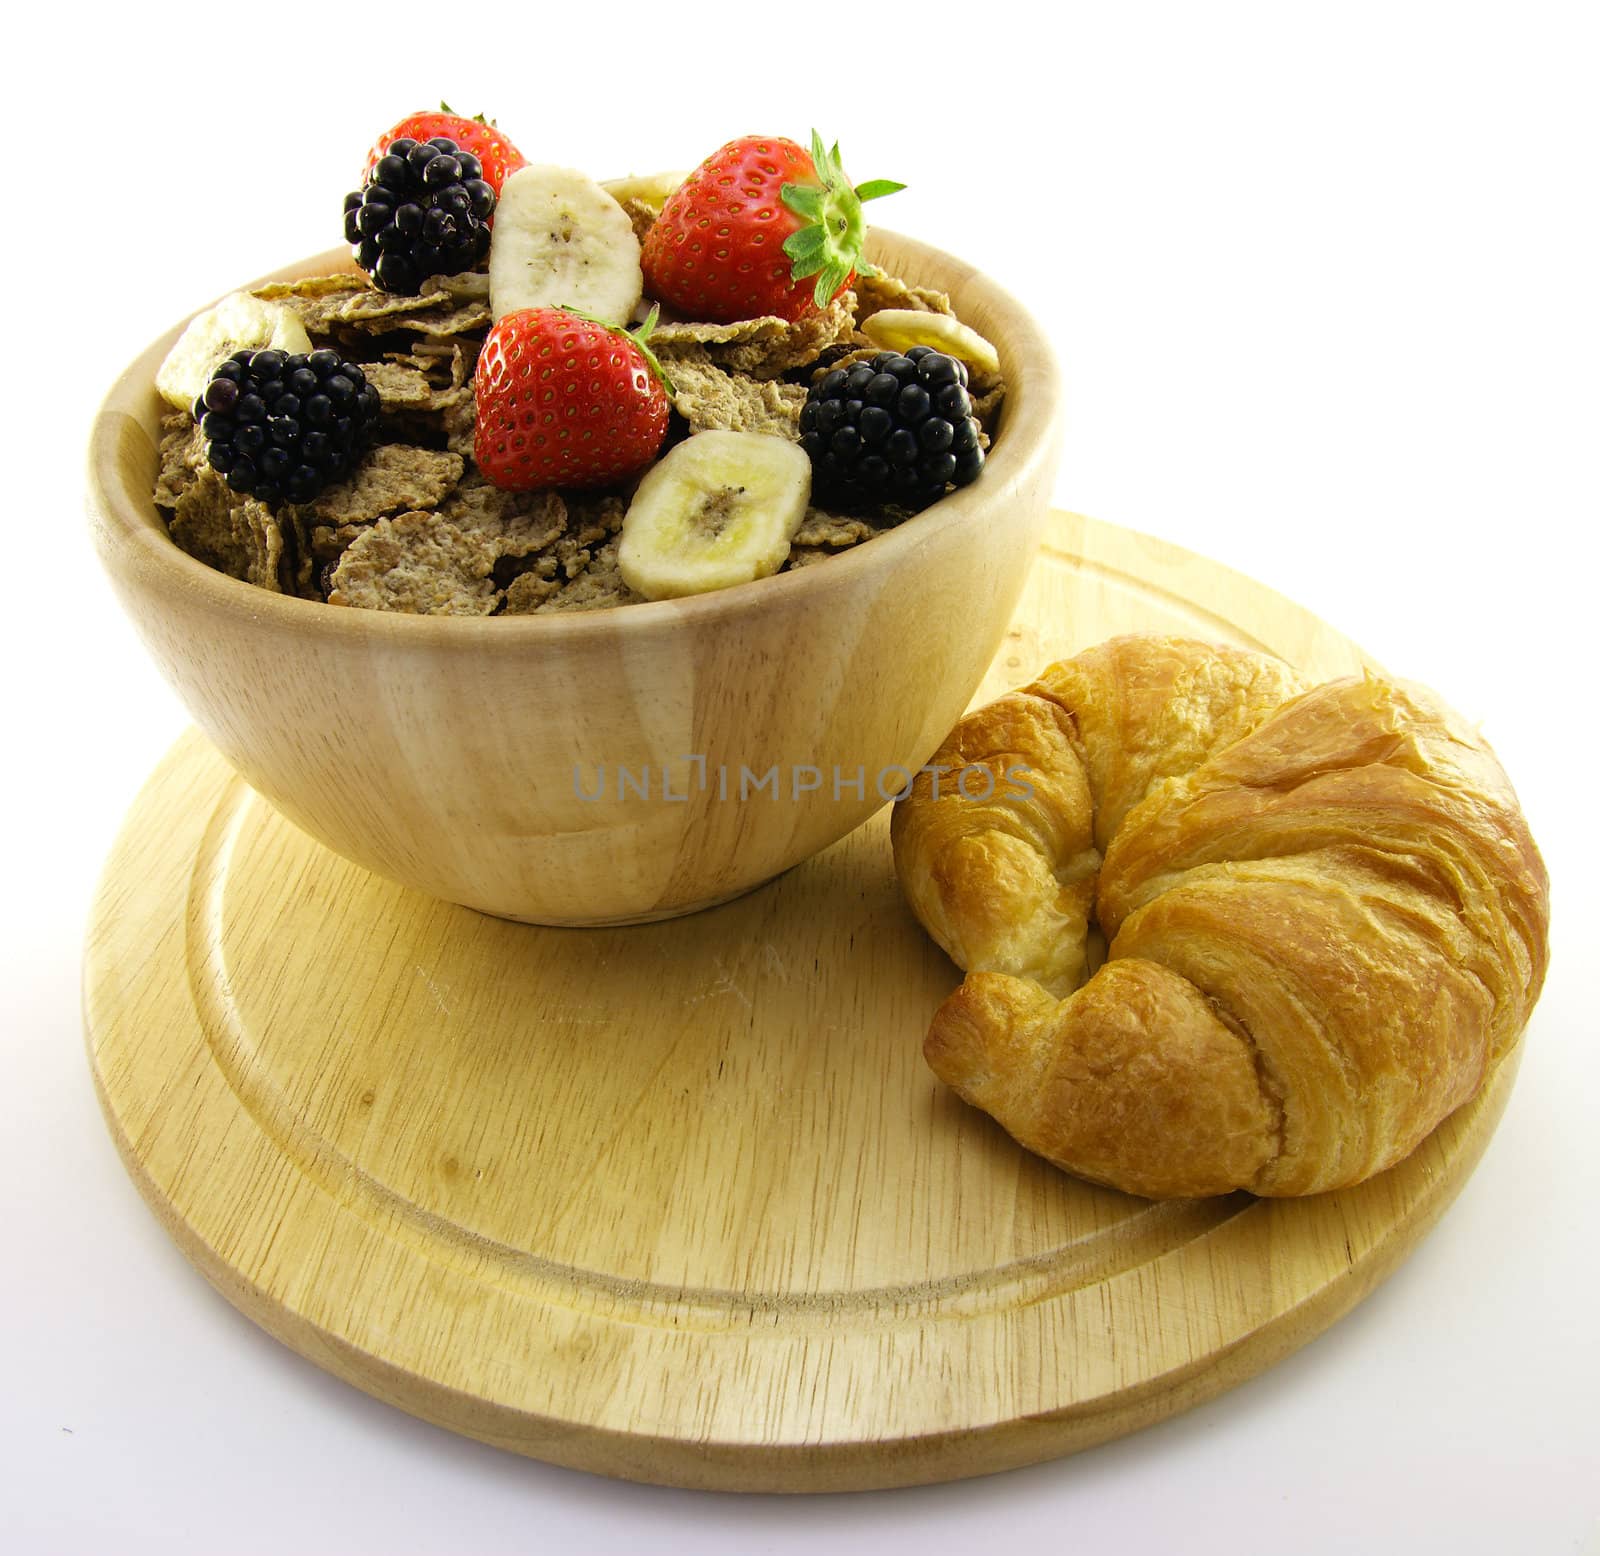 Bran Flakes in a Wooden Bowl by KeithWilson